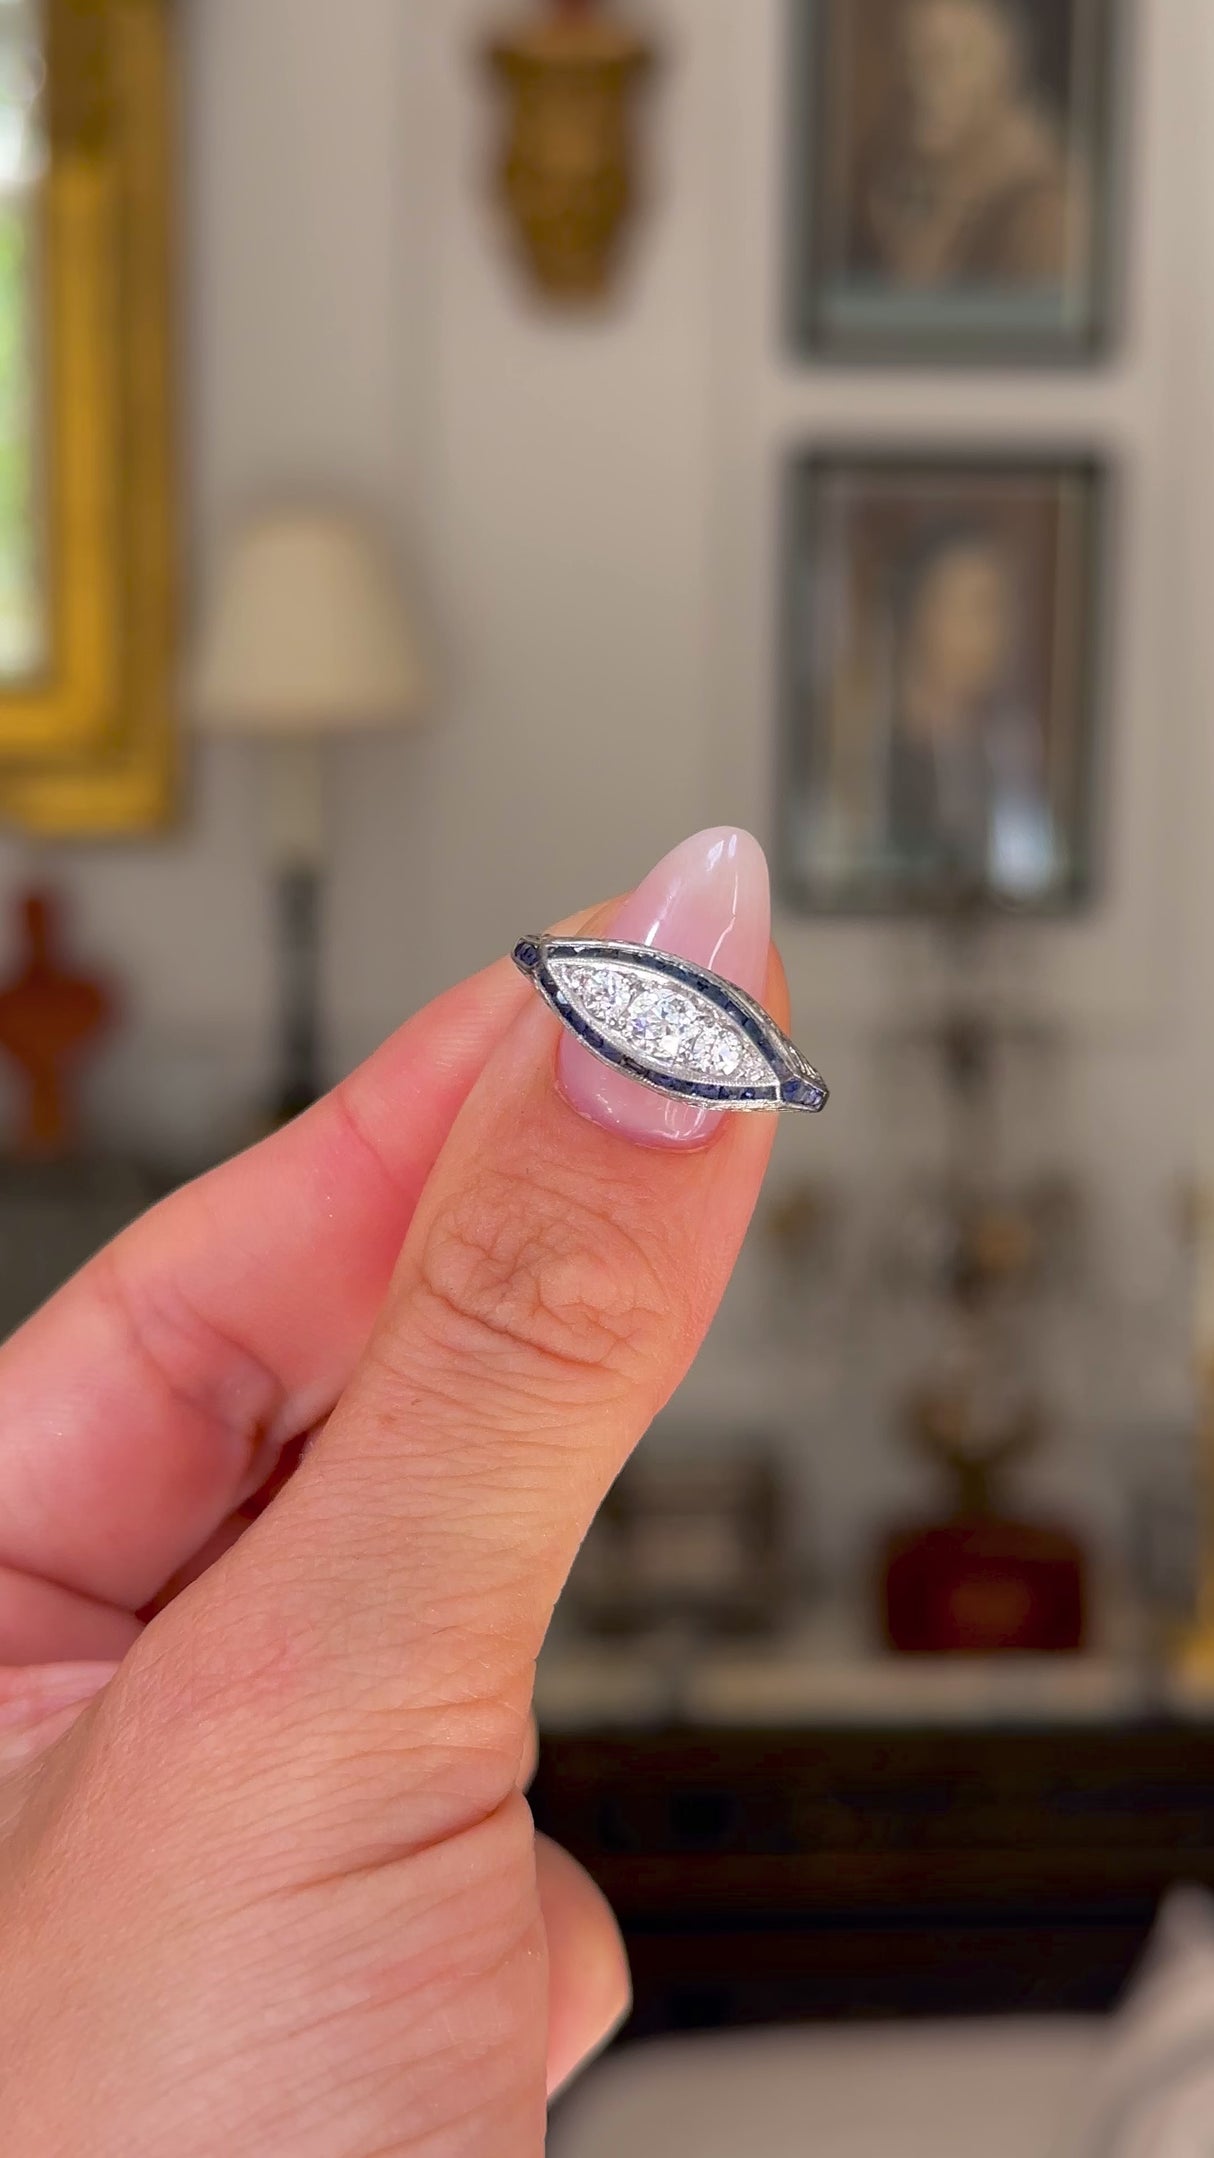 Antique Edwardian sapphire and diamond ring held in fingers and moved around to give perspective.